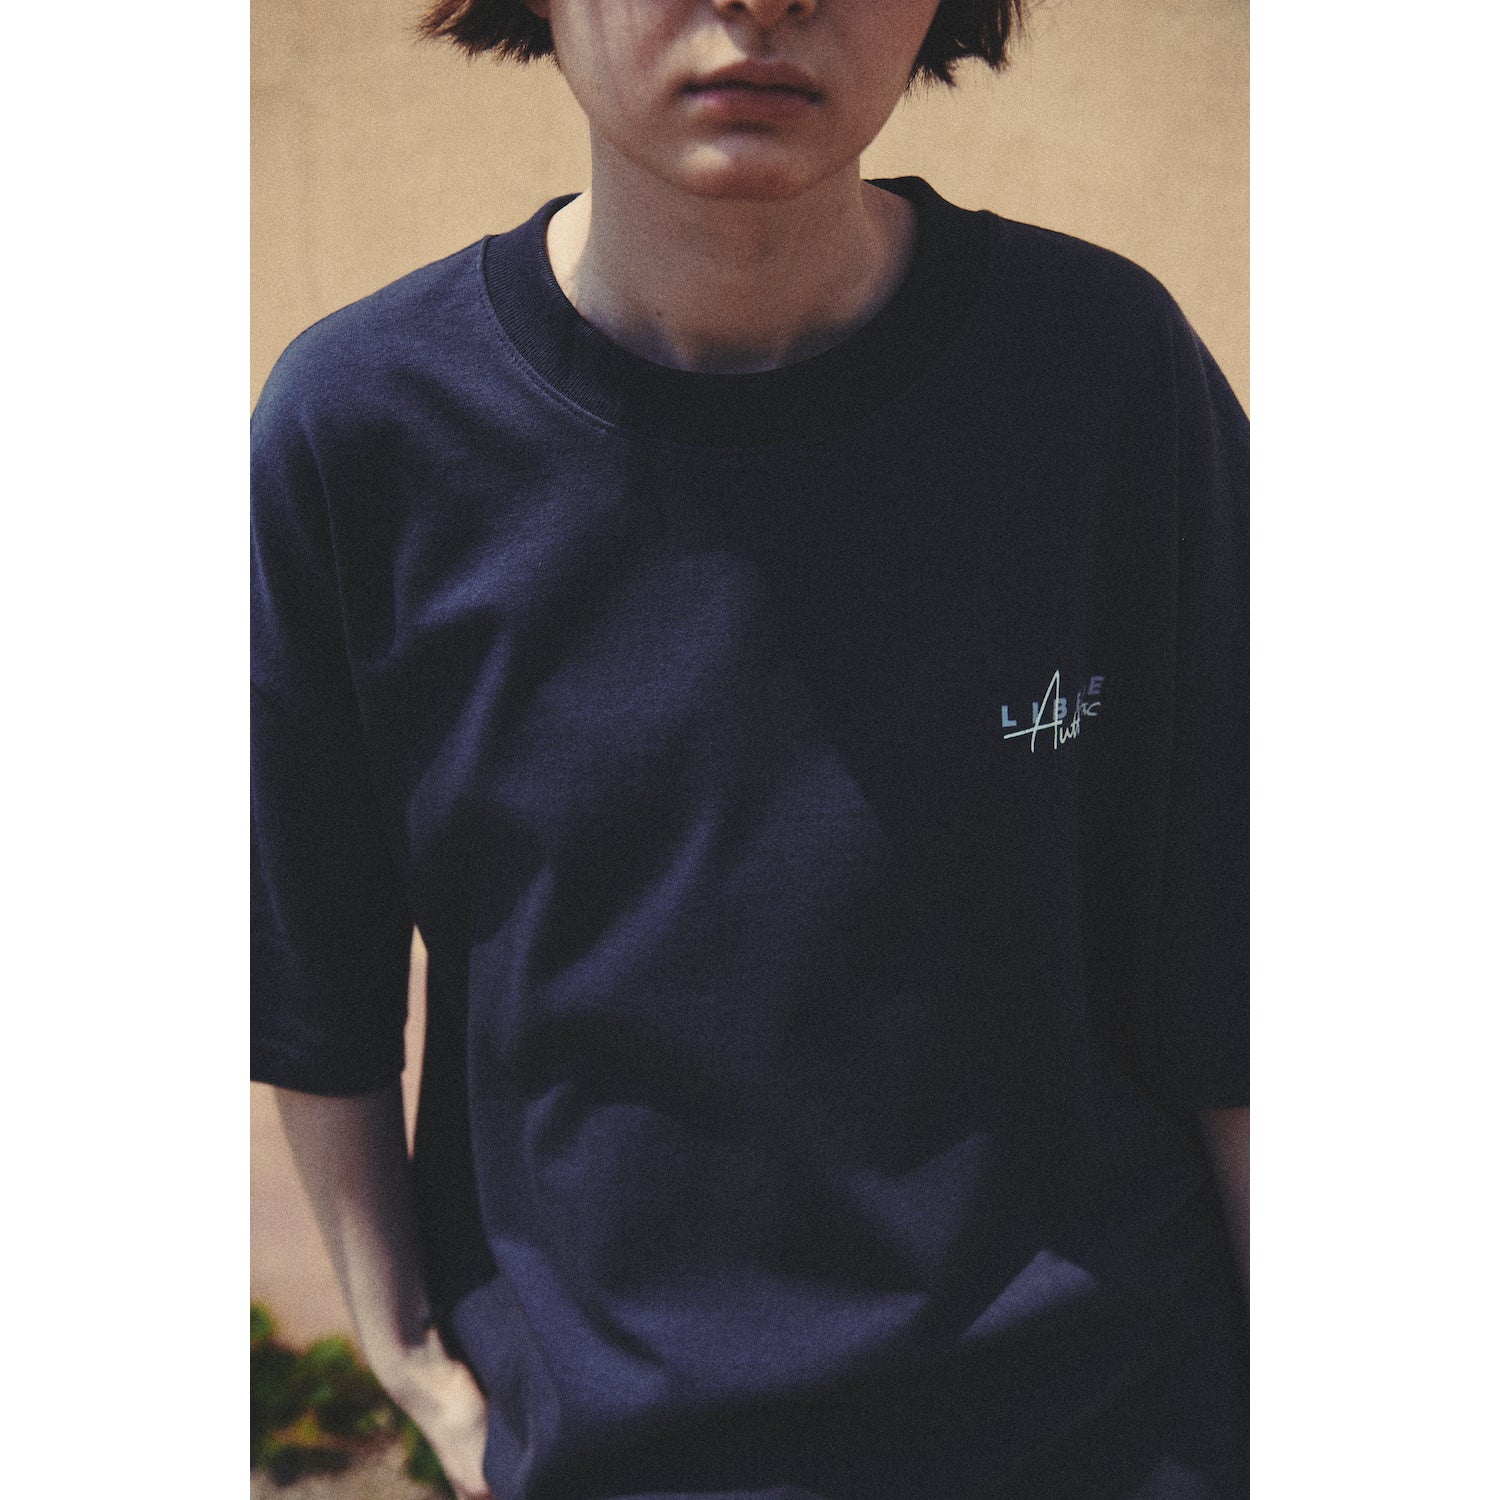 LIBERE AUTHENTIC LOGO TEE / CHARCOAL